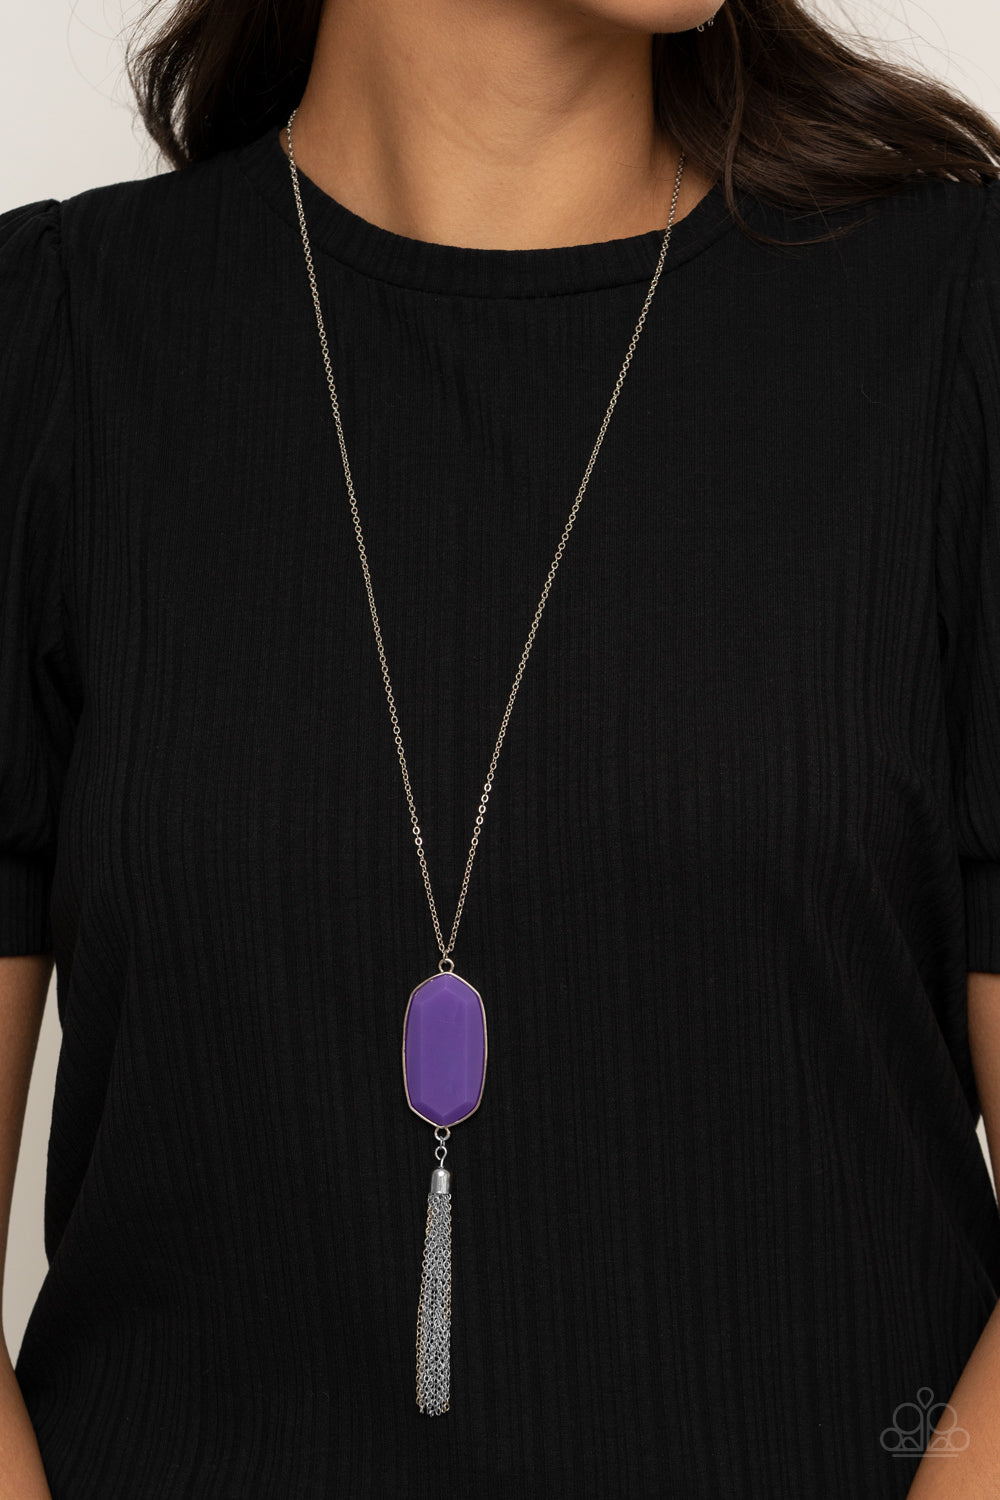 Got A Good Thing GLOWING - Purple and Silver Necklace - Paparazzi Accessories - Featuring a faceted surface, a dewy purple acrylic gem swings from the bottom of a lengthened silver chain. A shimmery silver chain tassel attaches to the bottom of the colorful pendant, adding flirtatious movement. Features an adjustable clasp closure. Sold as one individual necklace.